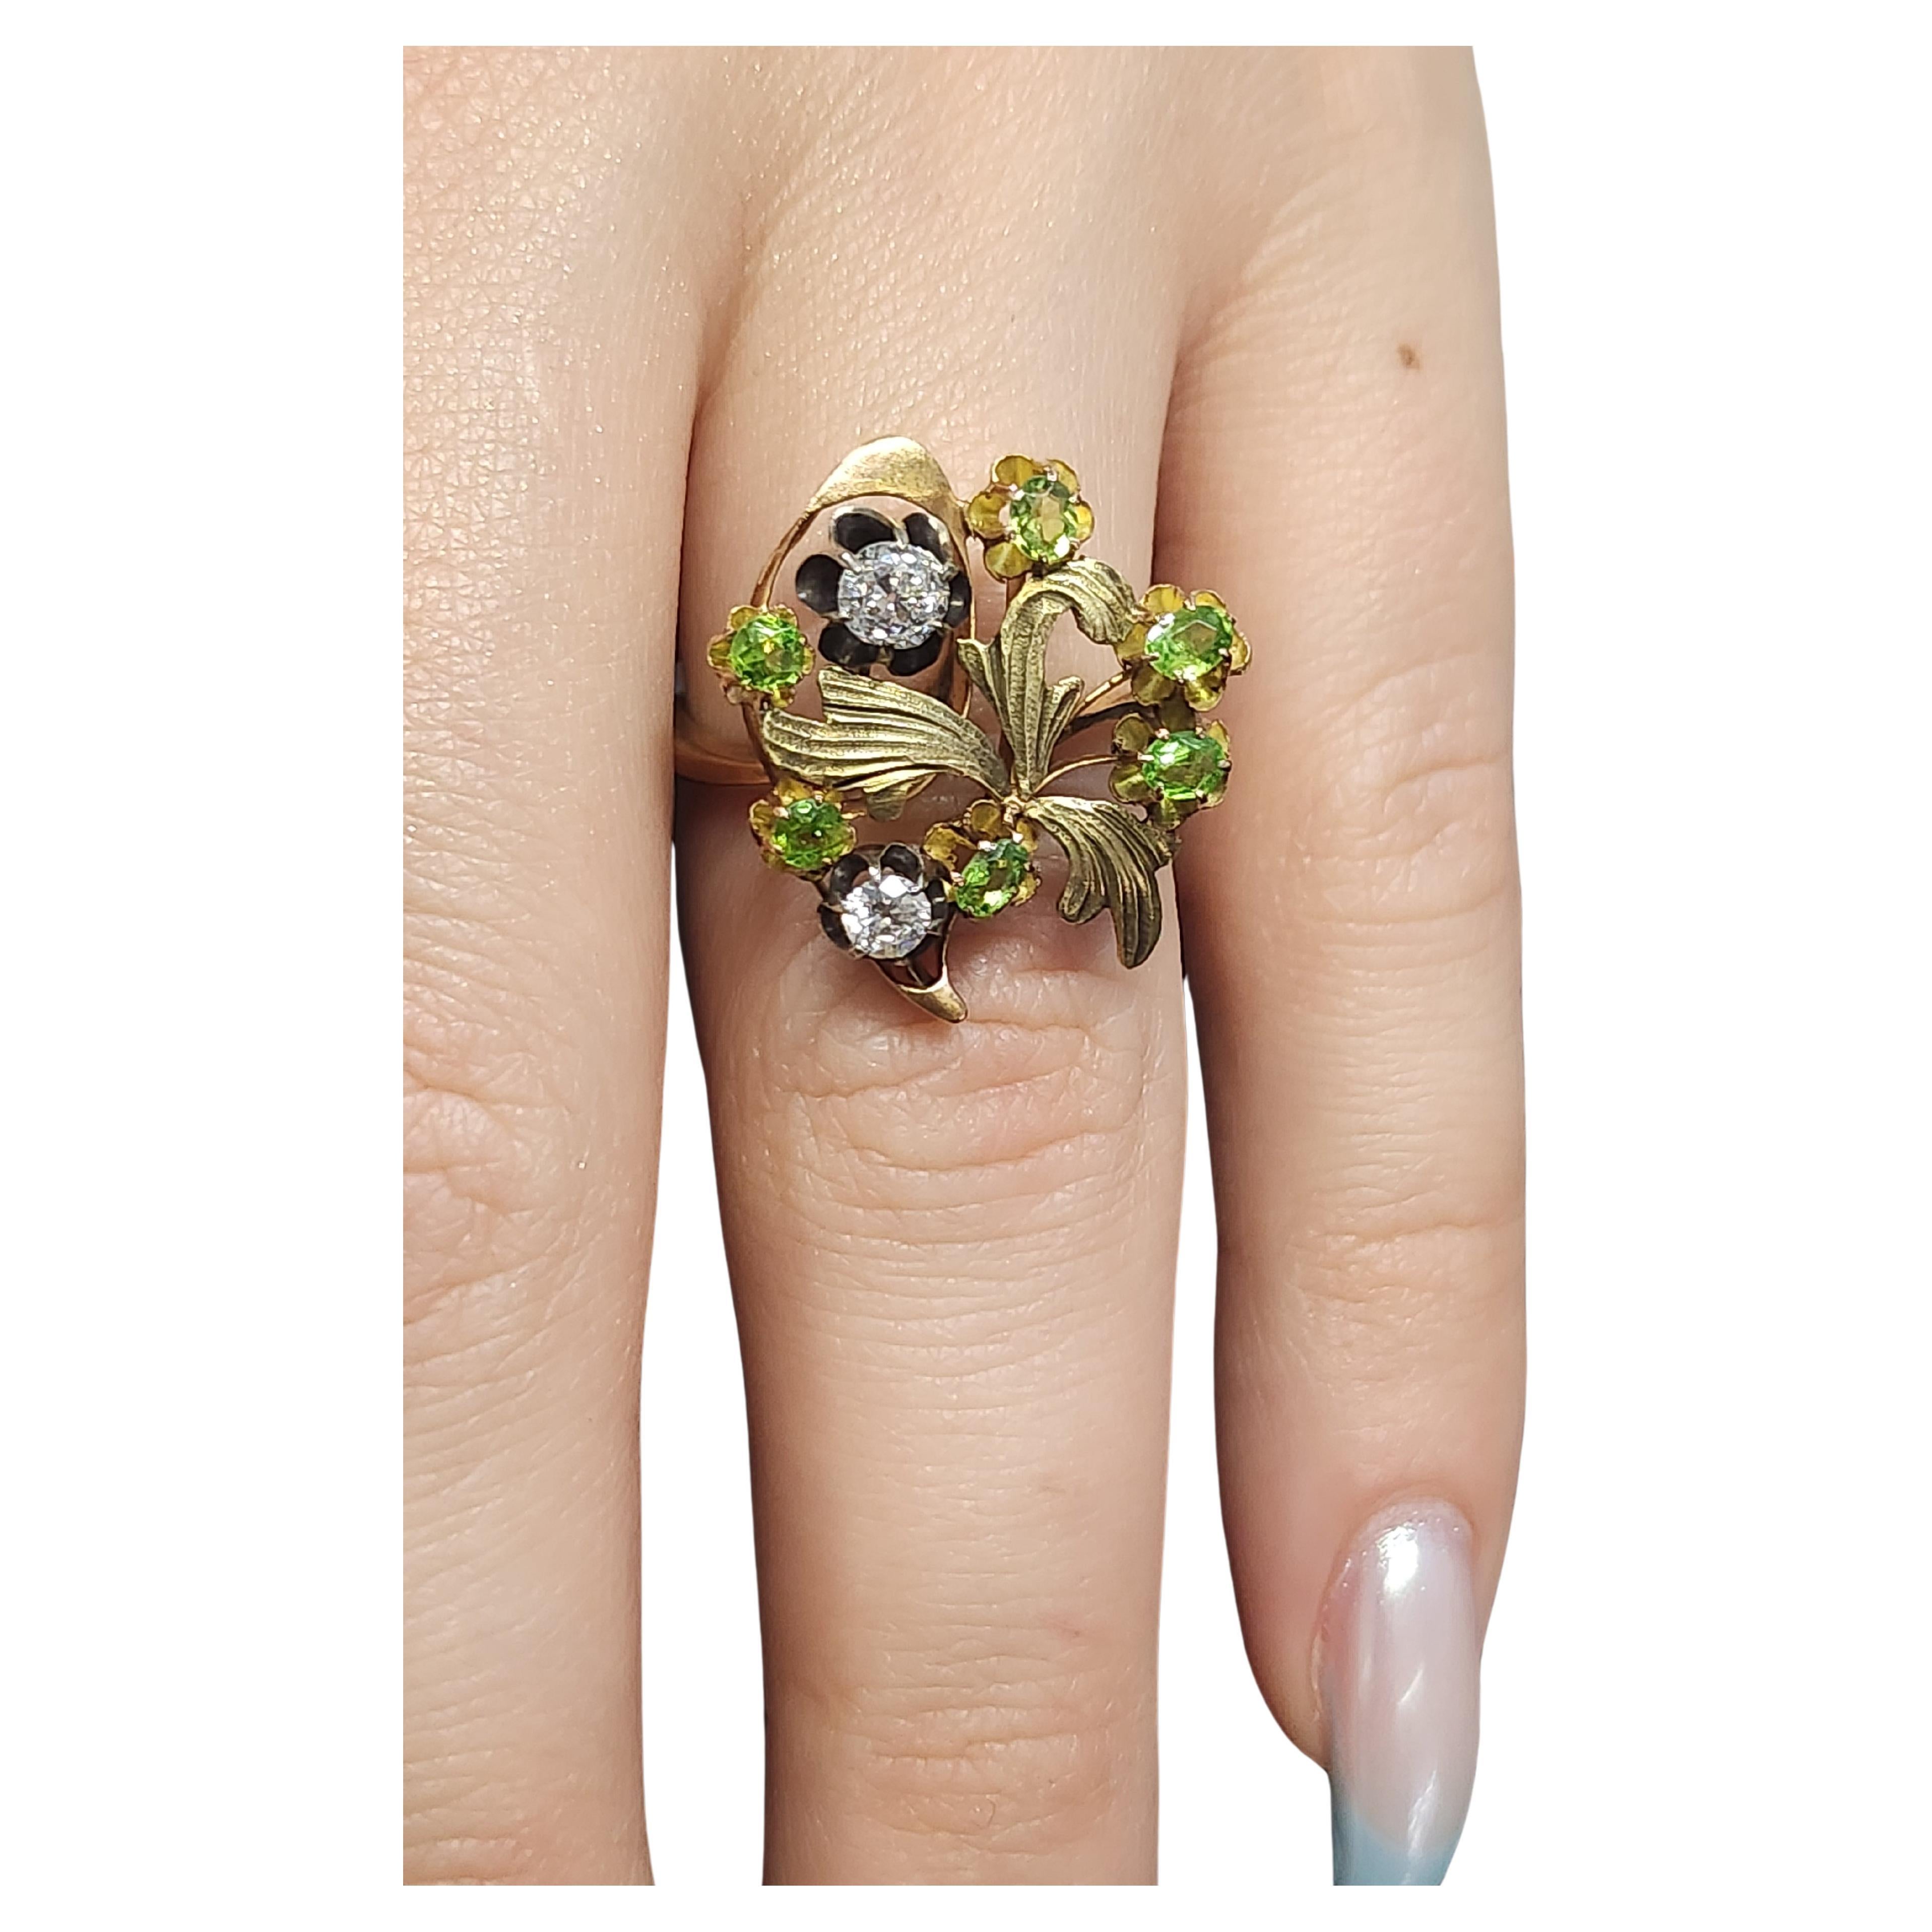  Antique large 14k gold ring in art noveu style centered with 6 natural green demantoid and 2 old mine cut diamonds estimate weight of 0.60 carats in detailed workmanship leafs and floral designe 